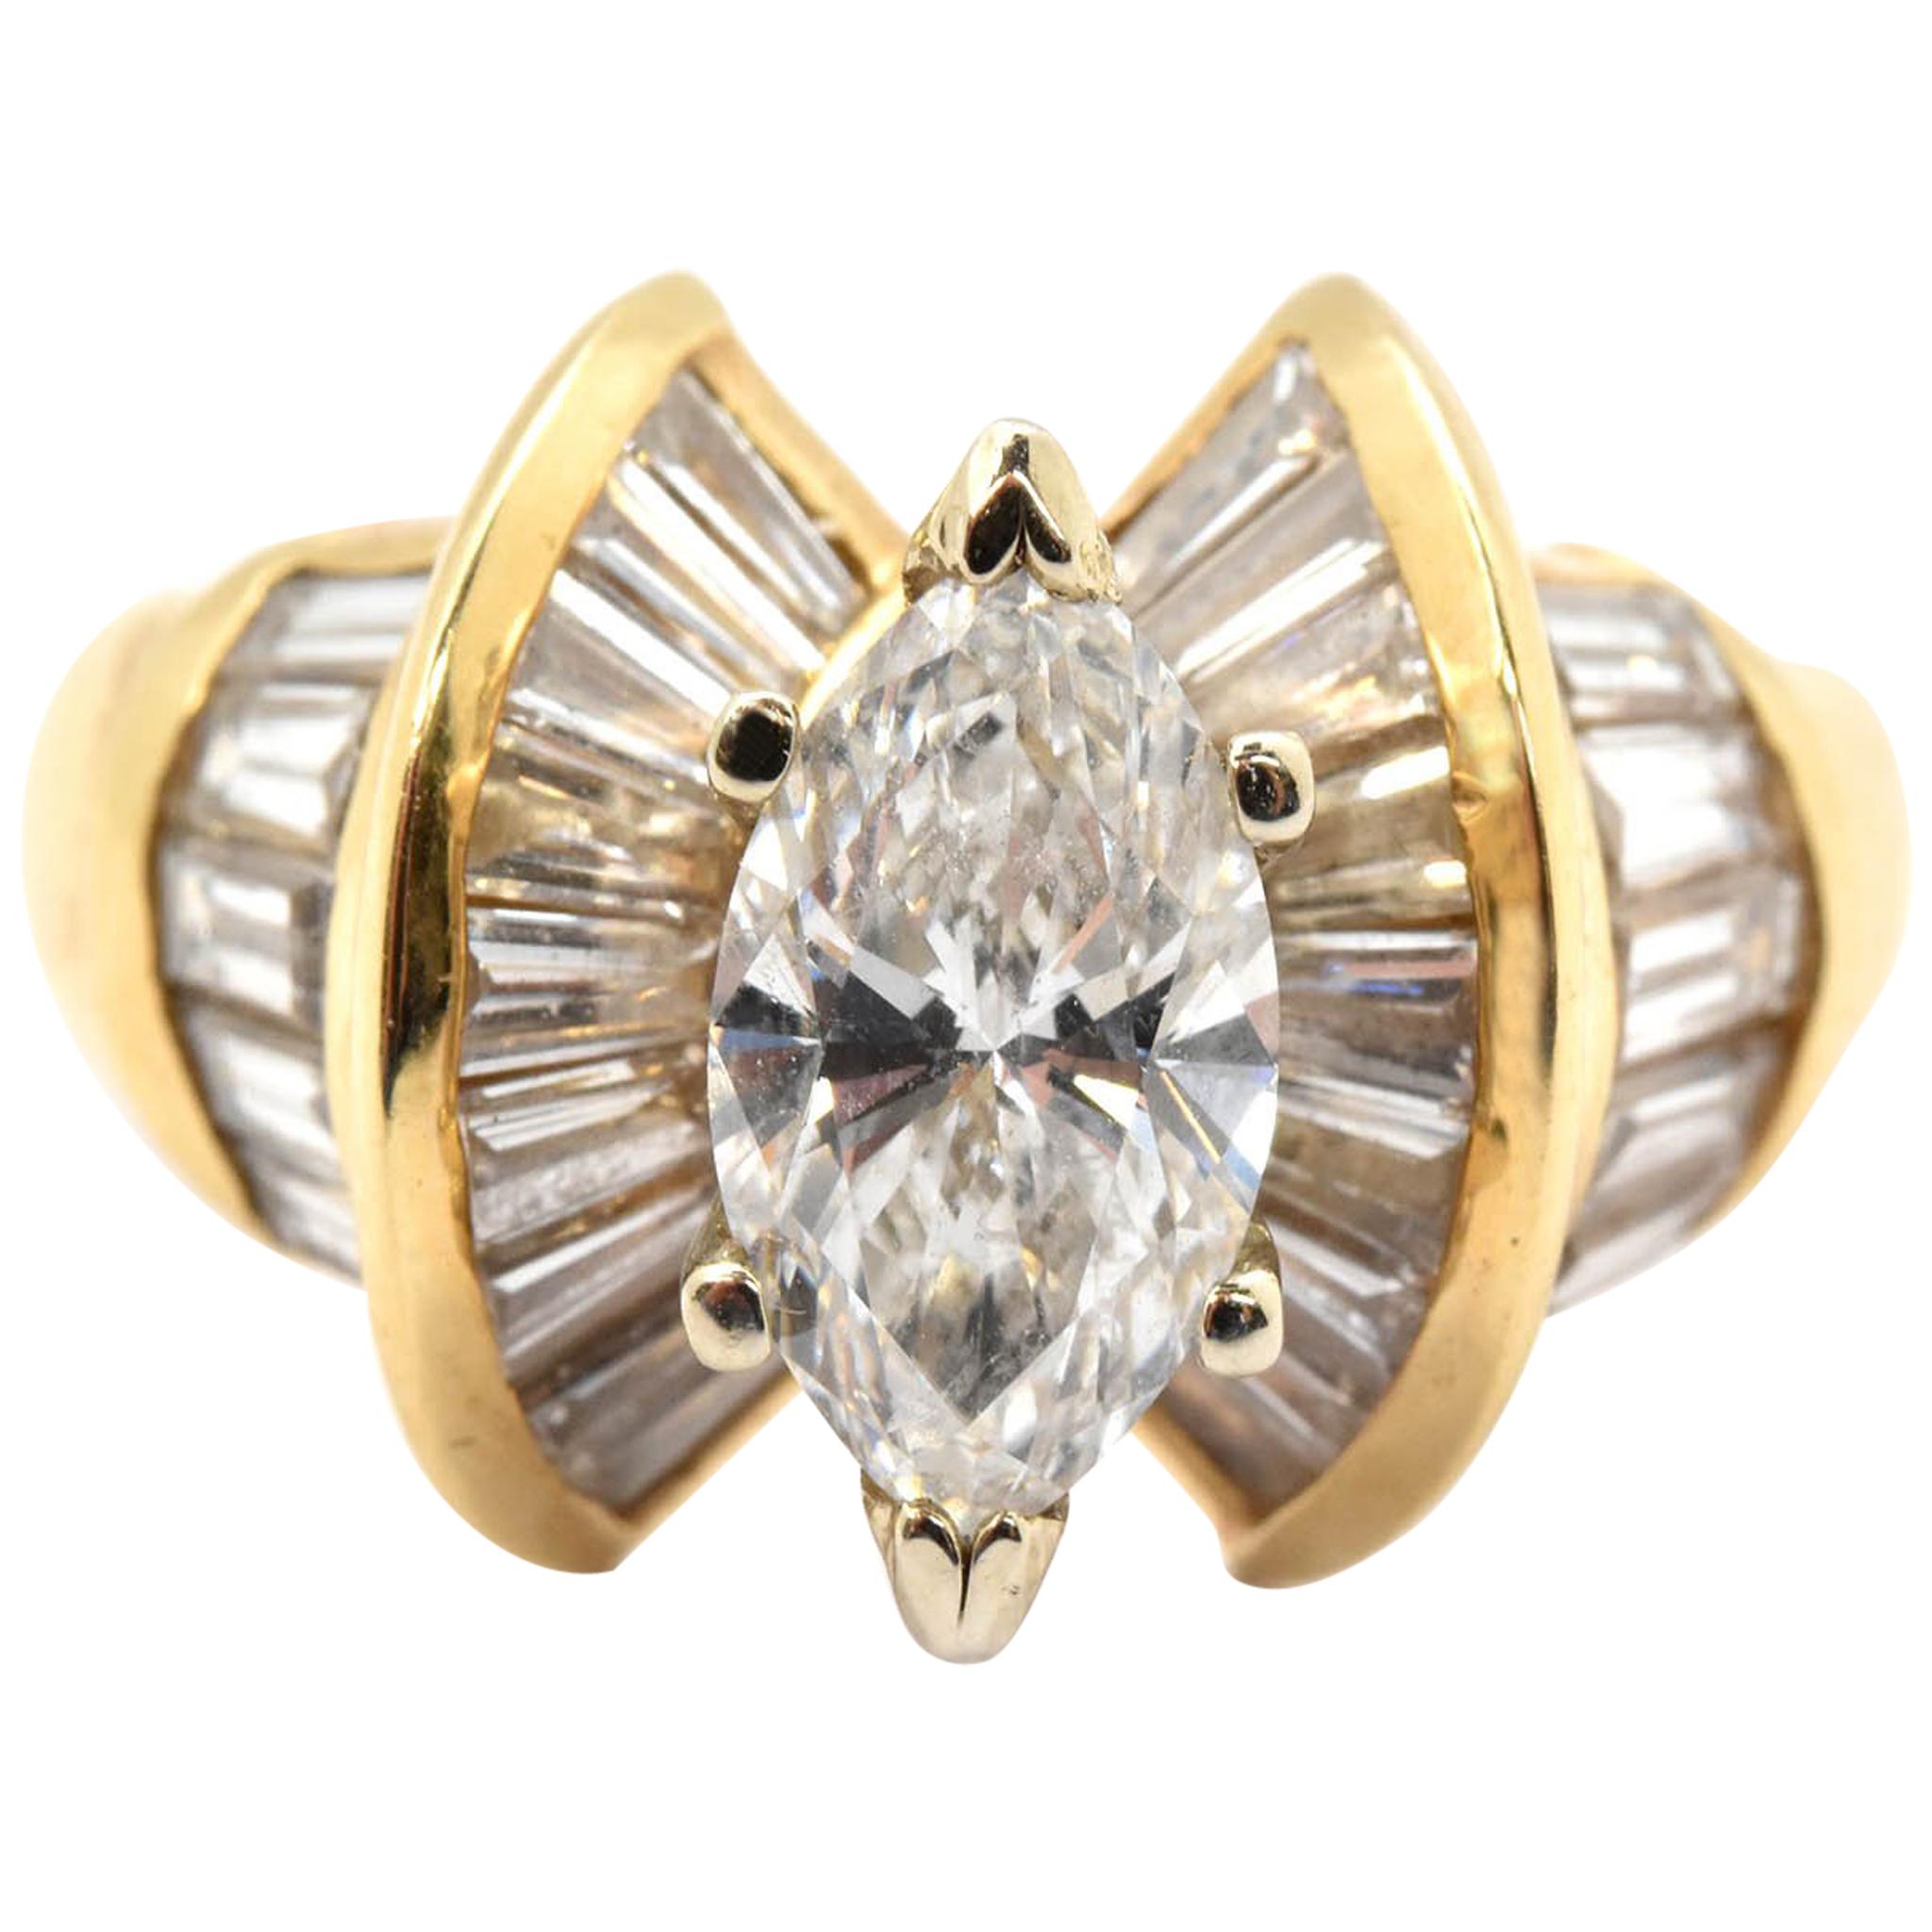 14 Karat Yellow Gold and EGL 1.20 Carat Marquise Diamond Ring with Baguettes